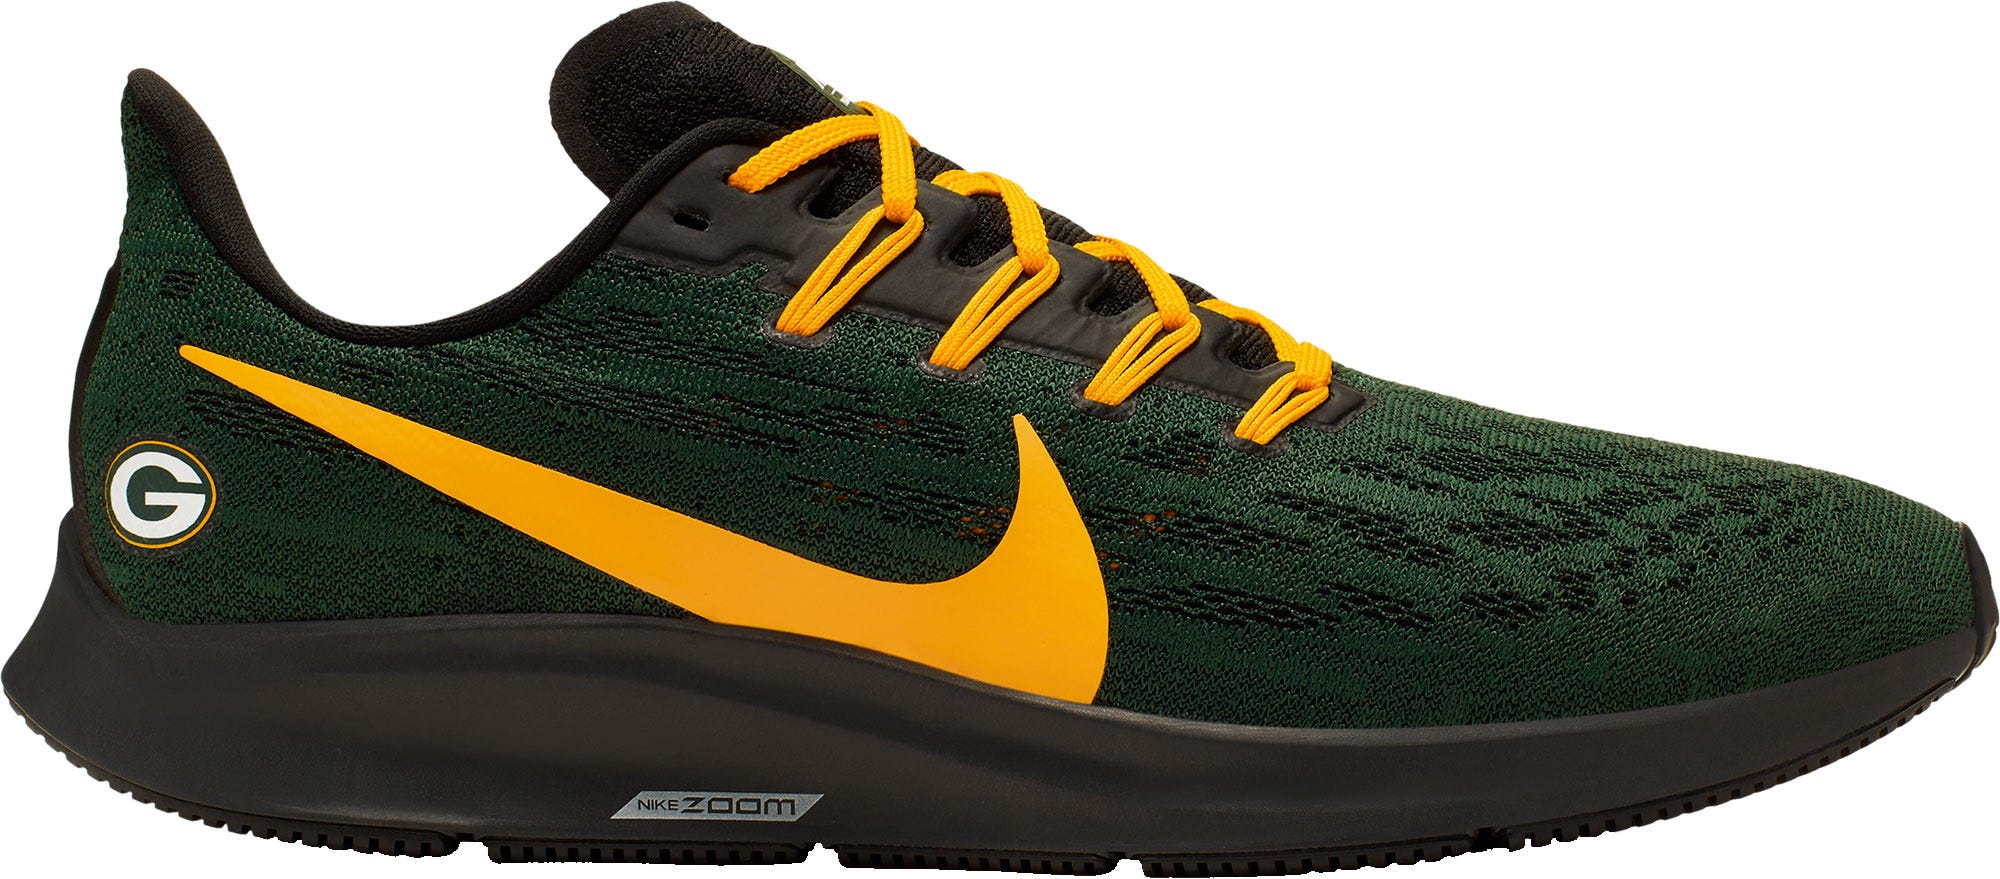 packers shoes nike